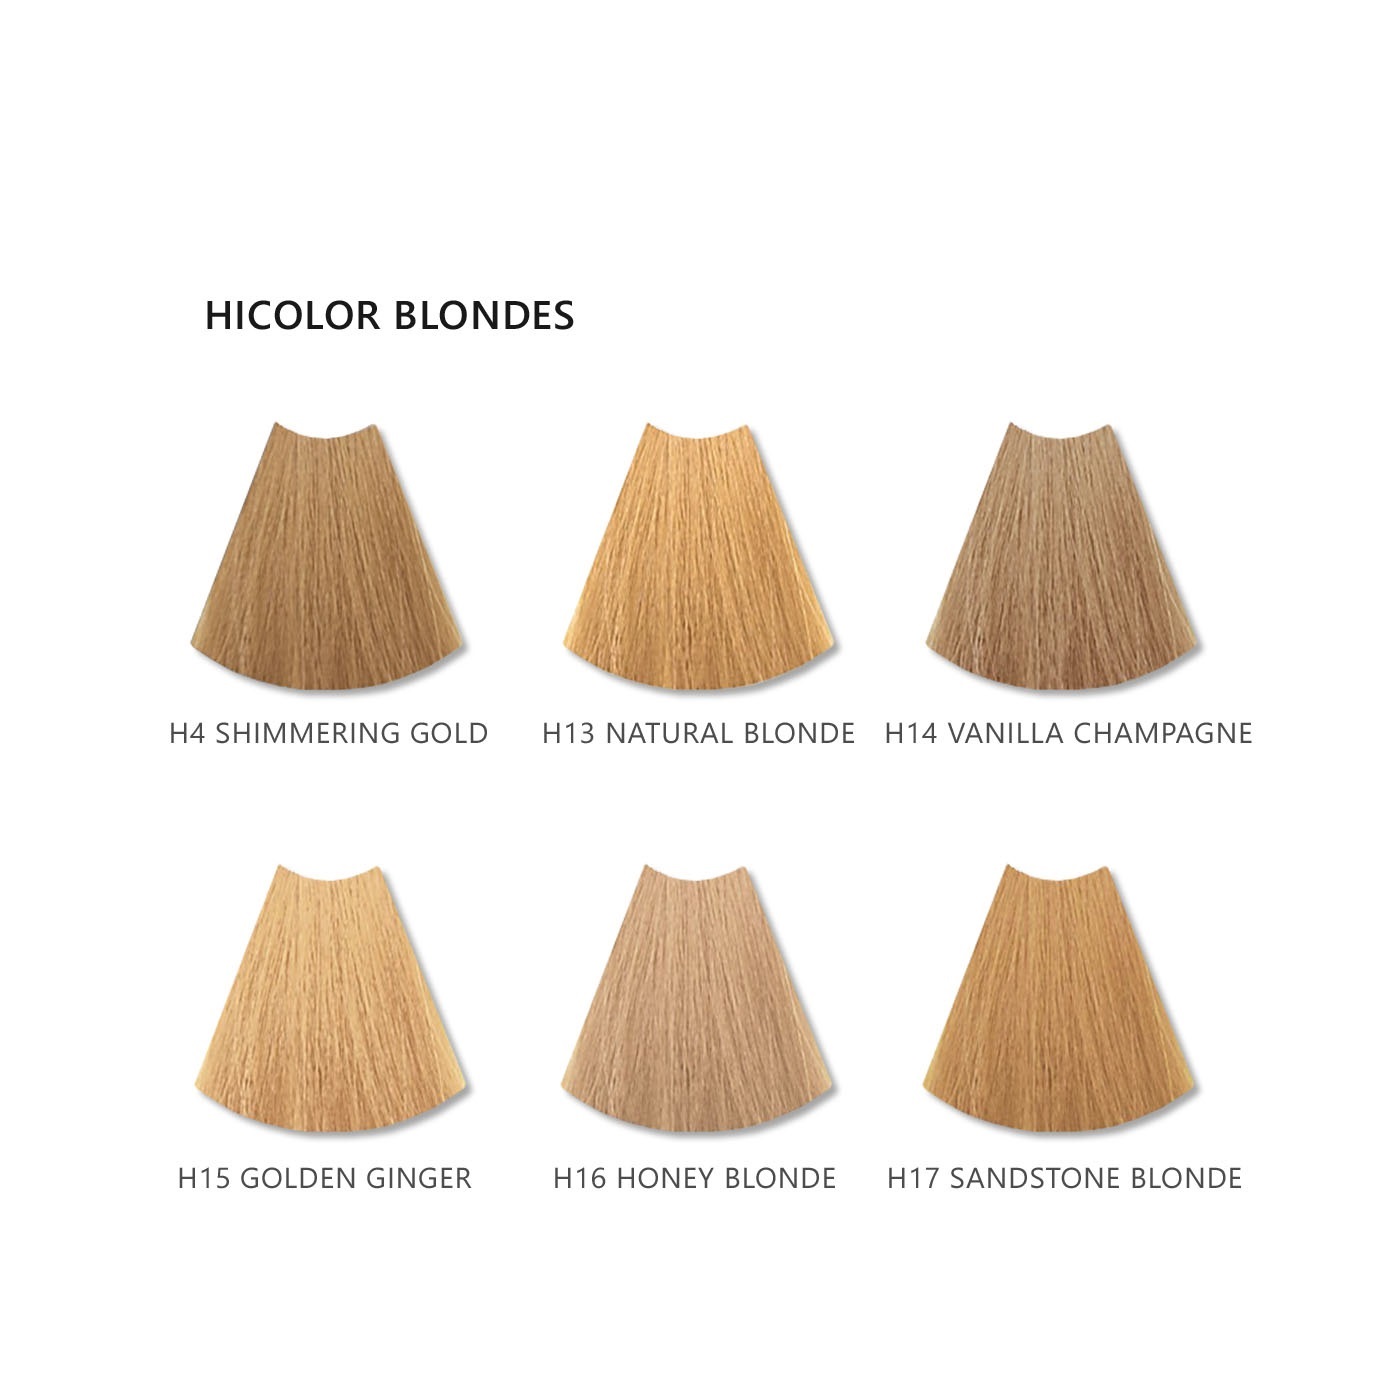 L'Oreal HiColor Blondes Shades